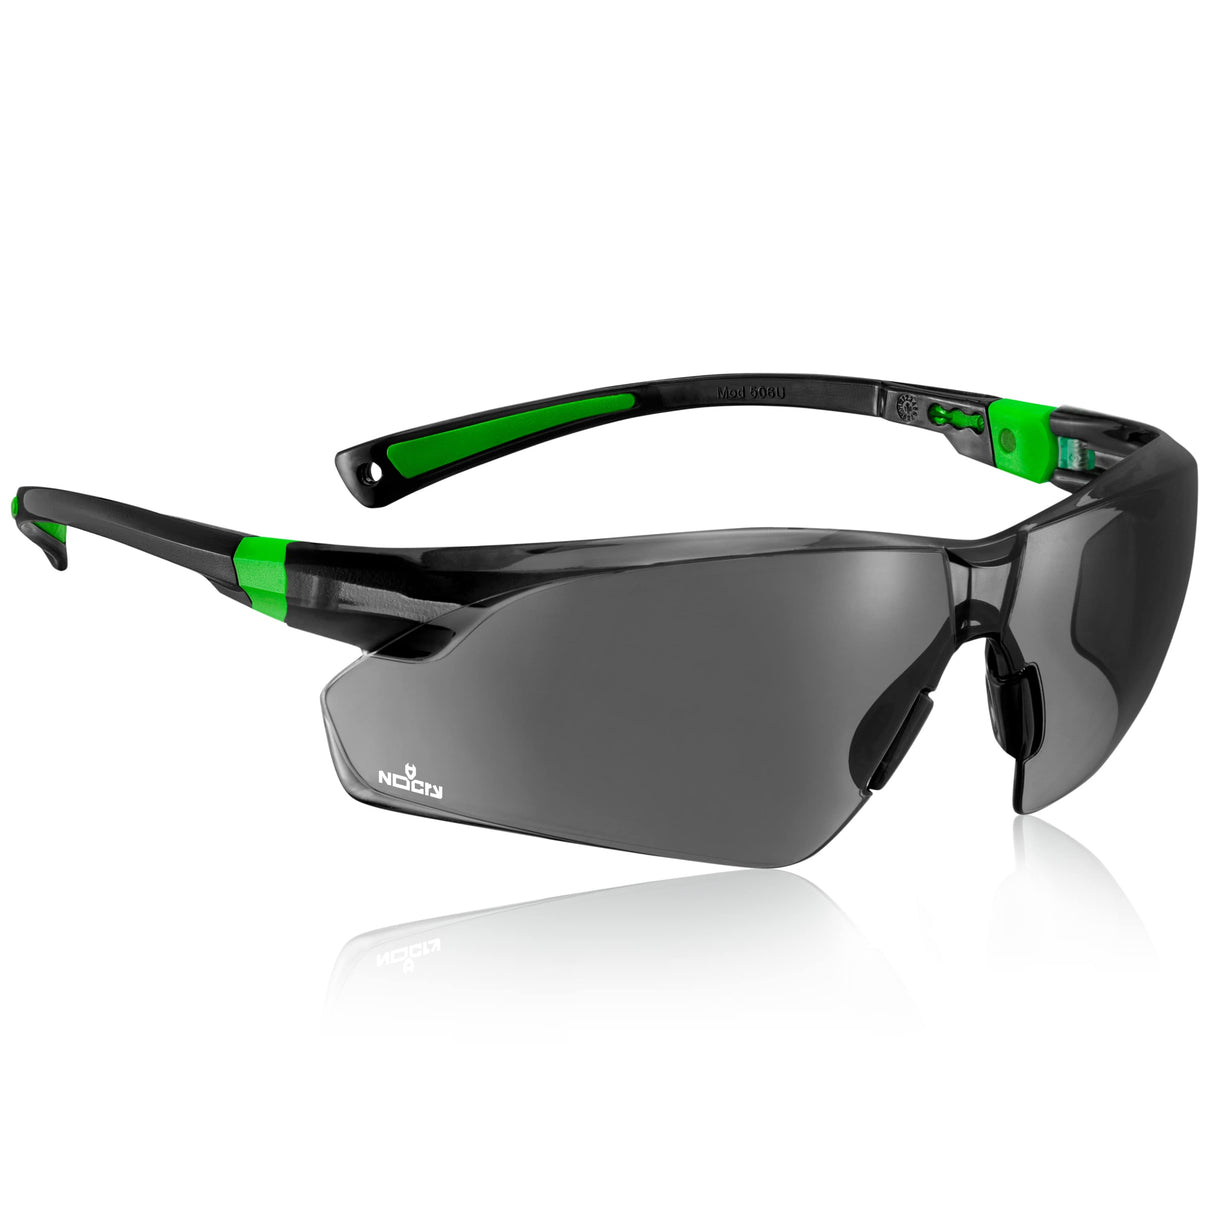 NoCry Work & Sports Safety Sunglasses - with Green Tinted Anti Scratch Wrap-Around Lenses, Non-Slip Grips, UV 400 Protection, Adjustable Fit, Blac